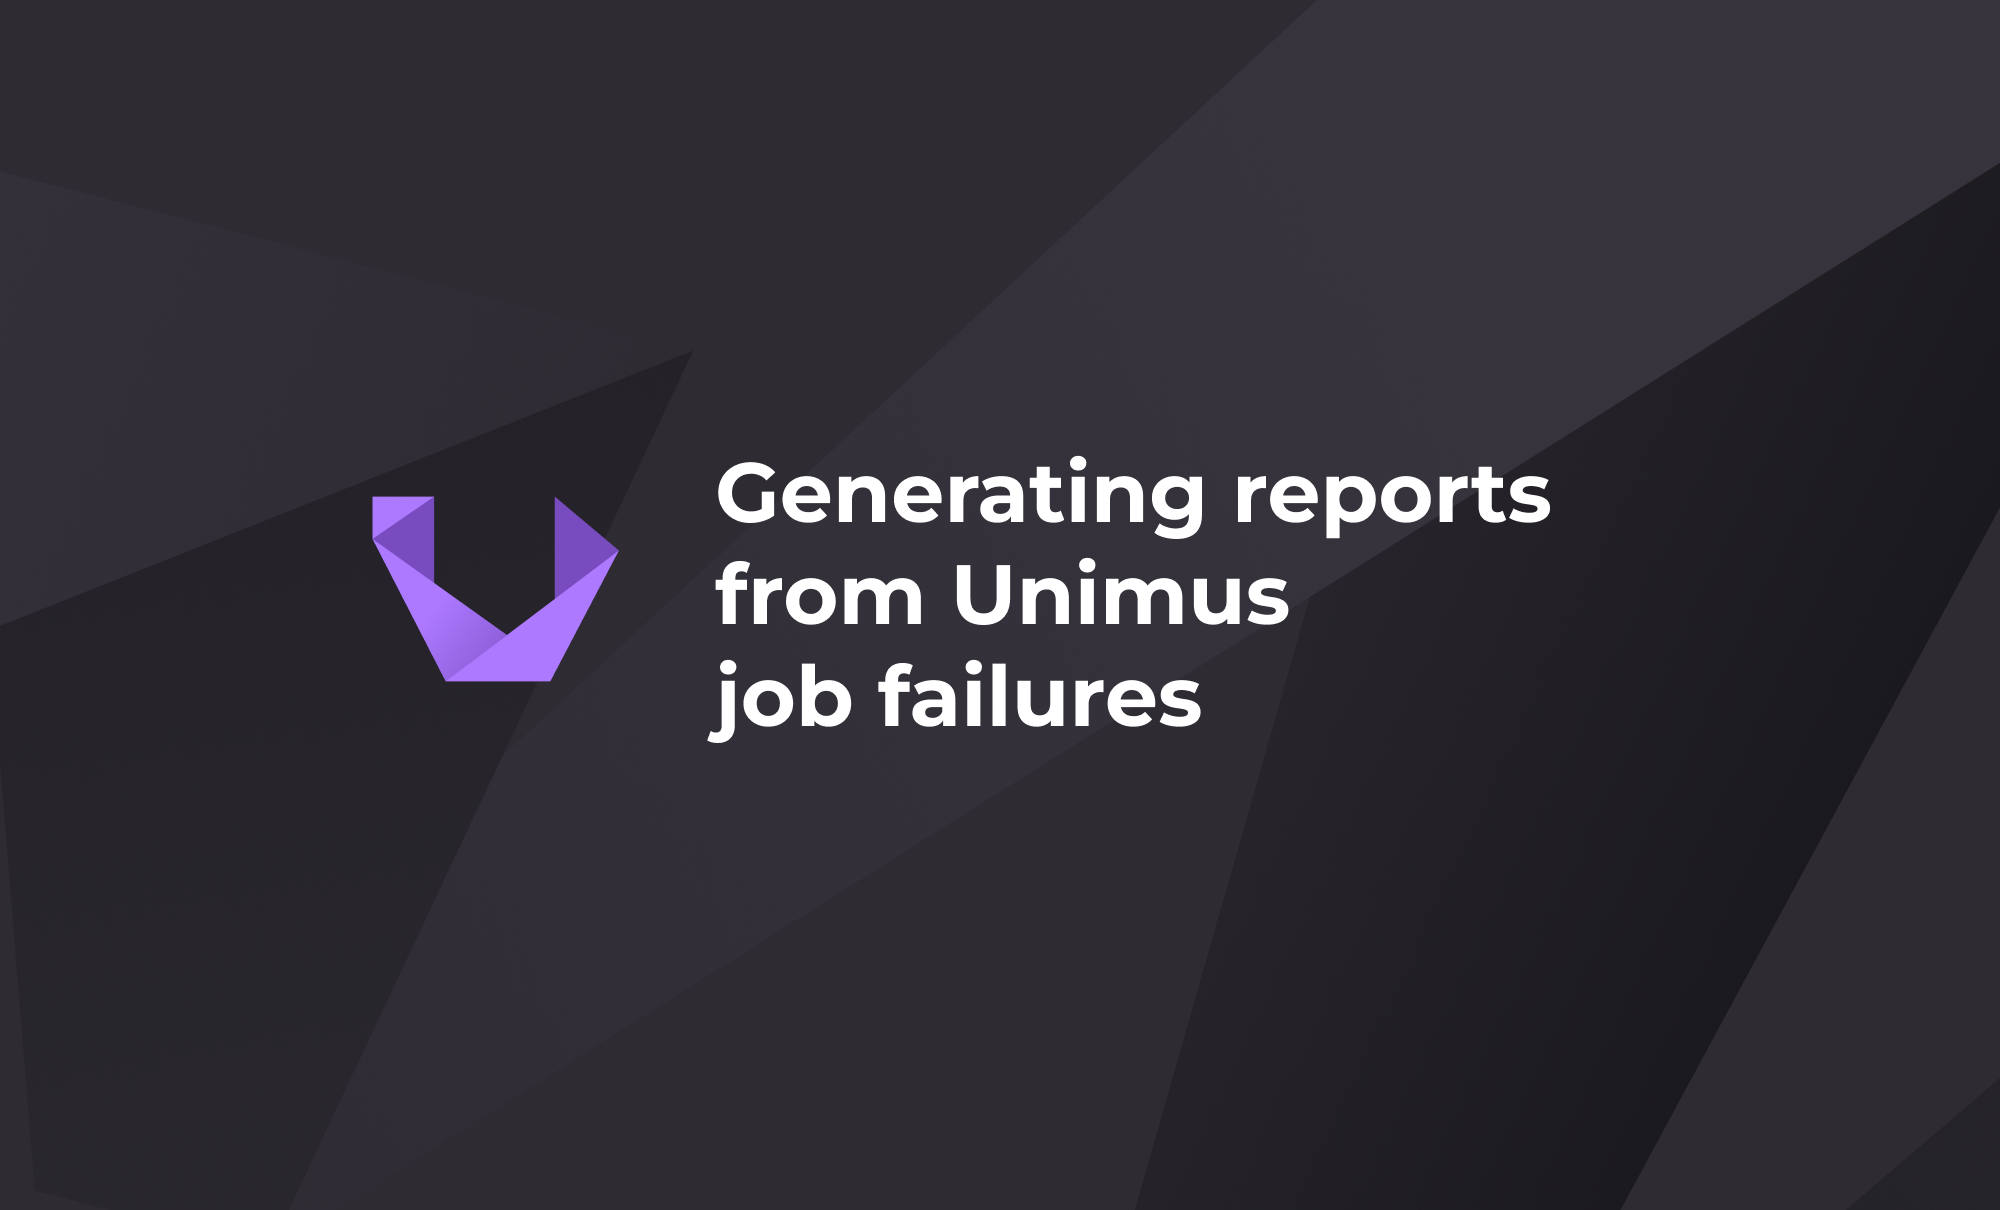 Generating reports from Unimus job failures